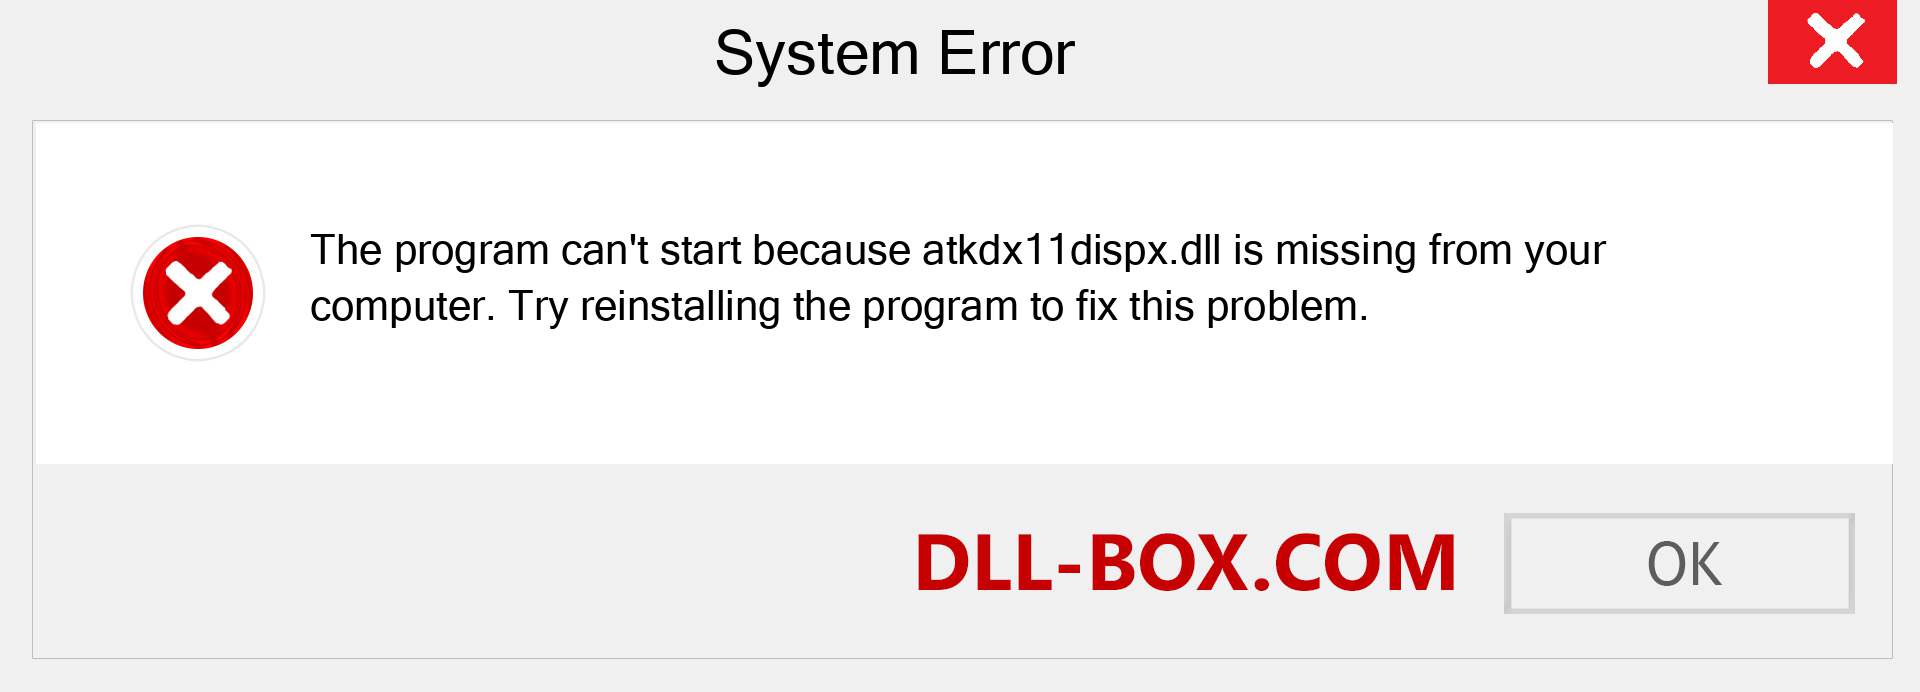  atkdx11dispx.dll file is missing?. Download for Windows 7, 8, 10 - Fix  atkdx11dispx dll Missing Error on Windows, photos, images